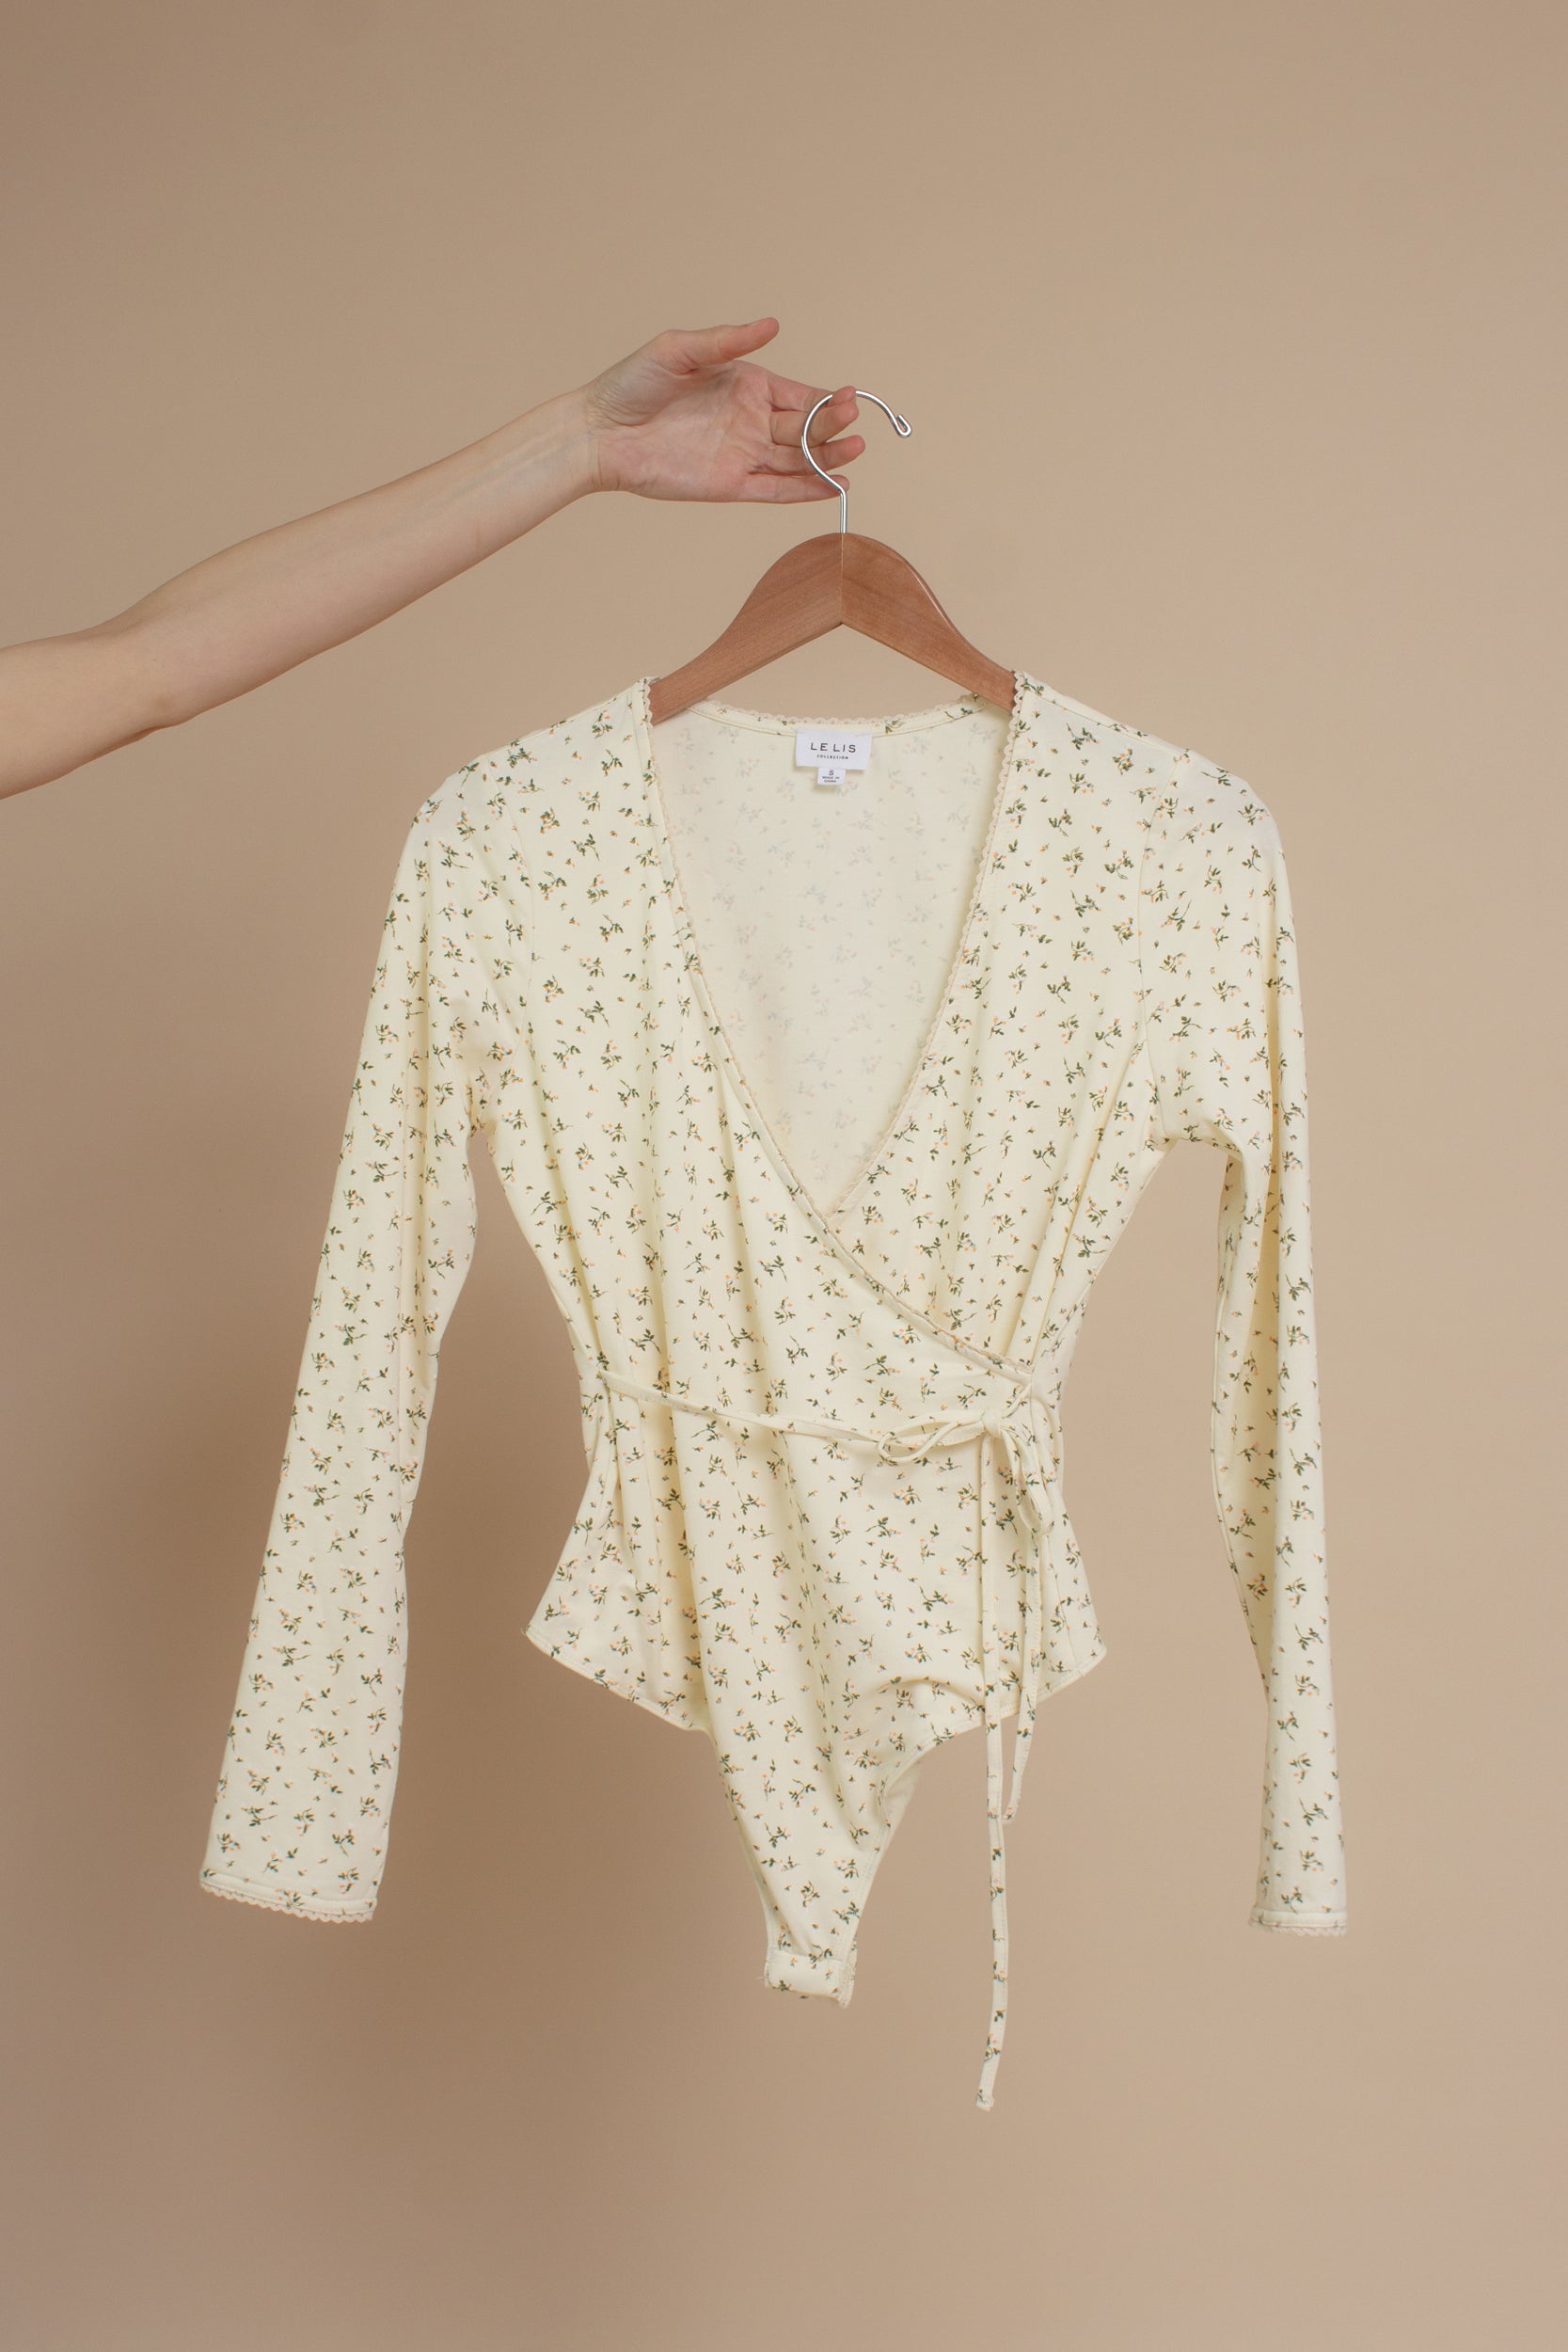 Floral print, wrap style bodysuit, in light yellow.